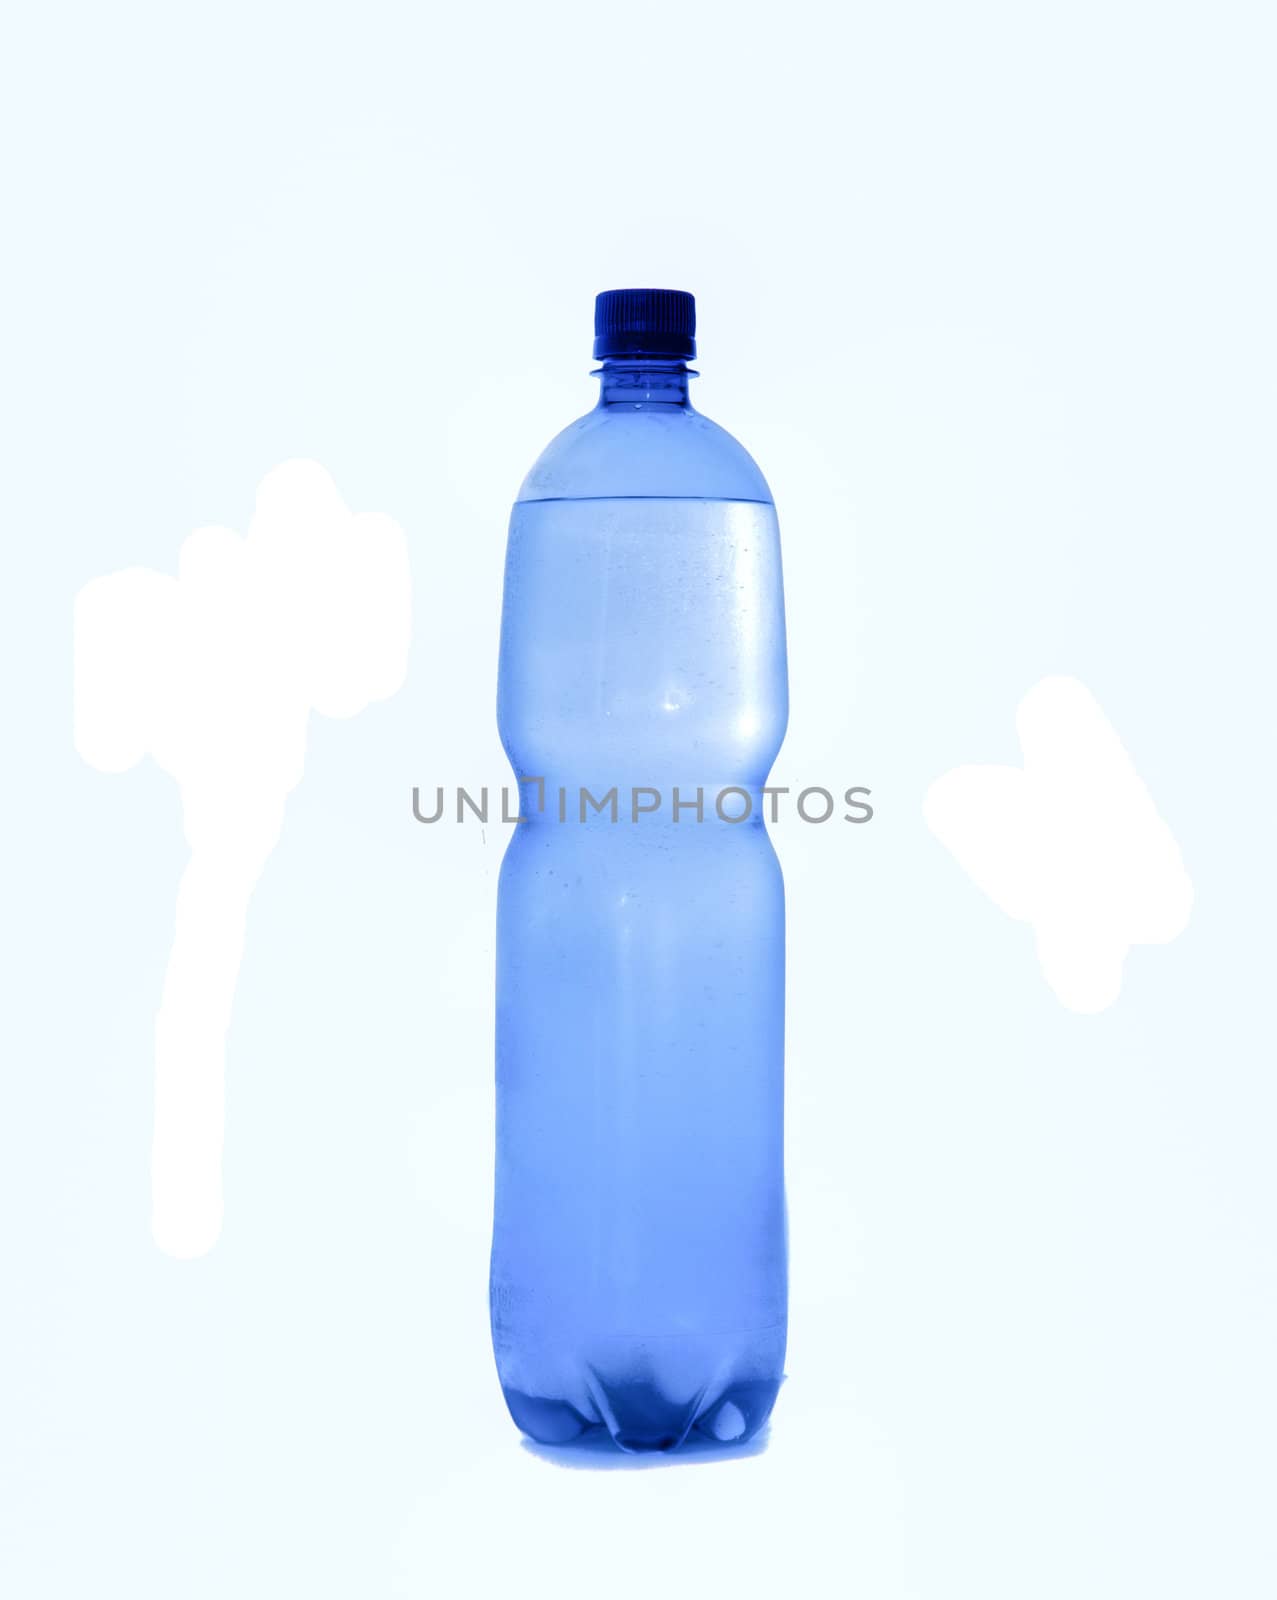 Bottle  with water. by Baltus